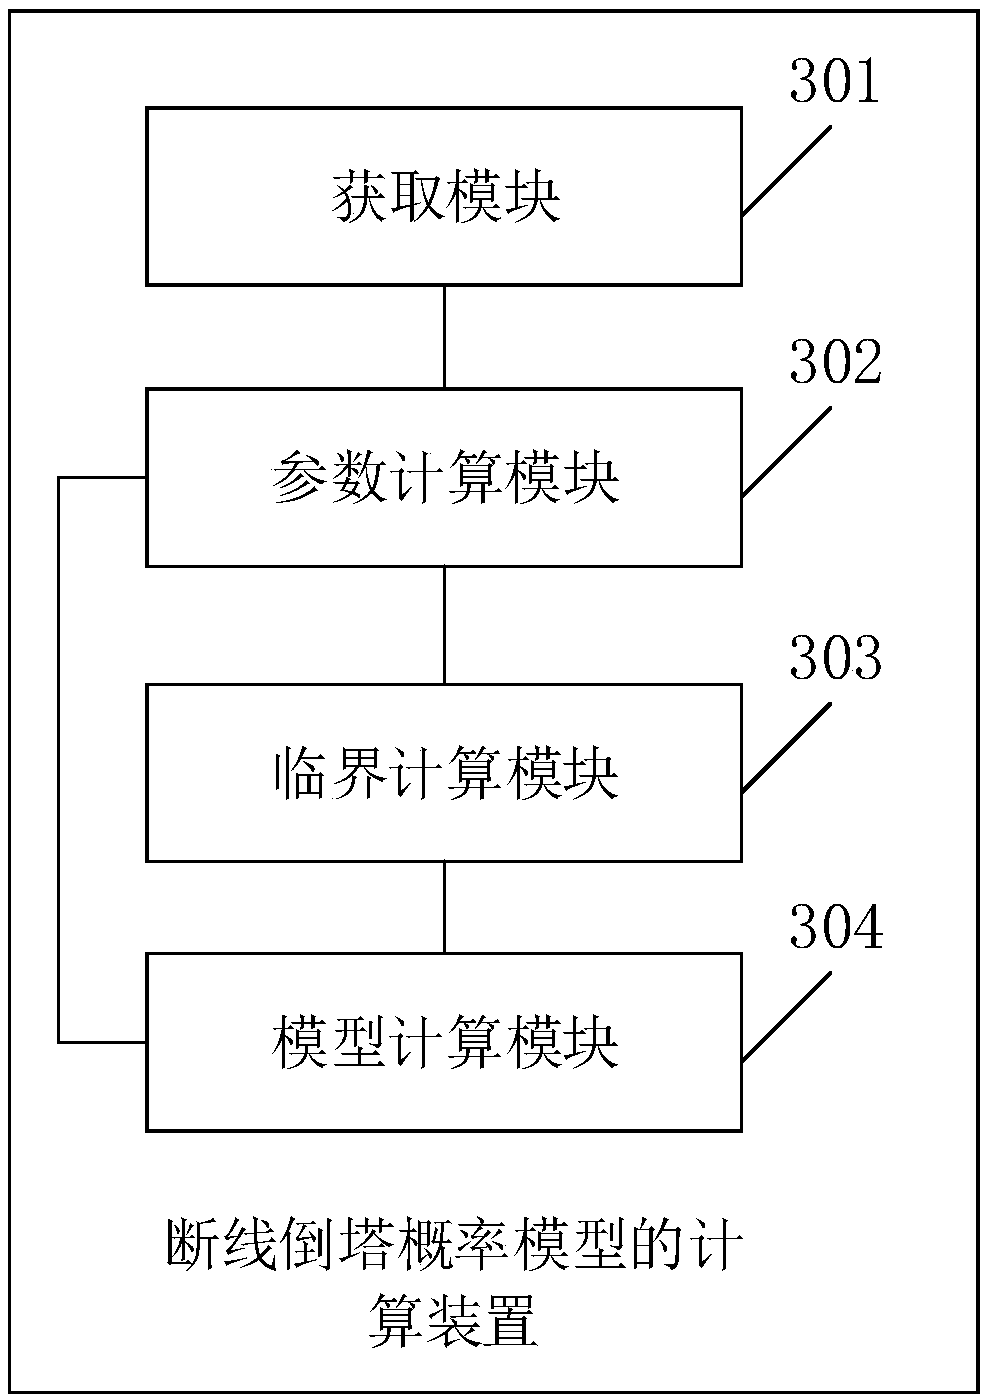 Computing method for line breakage and tower fall probability model as well as device